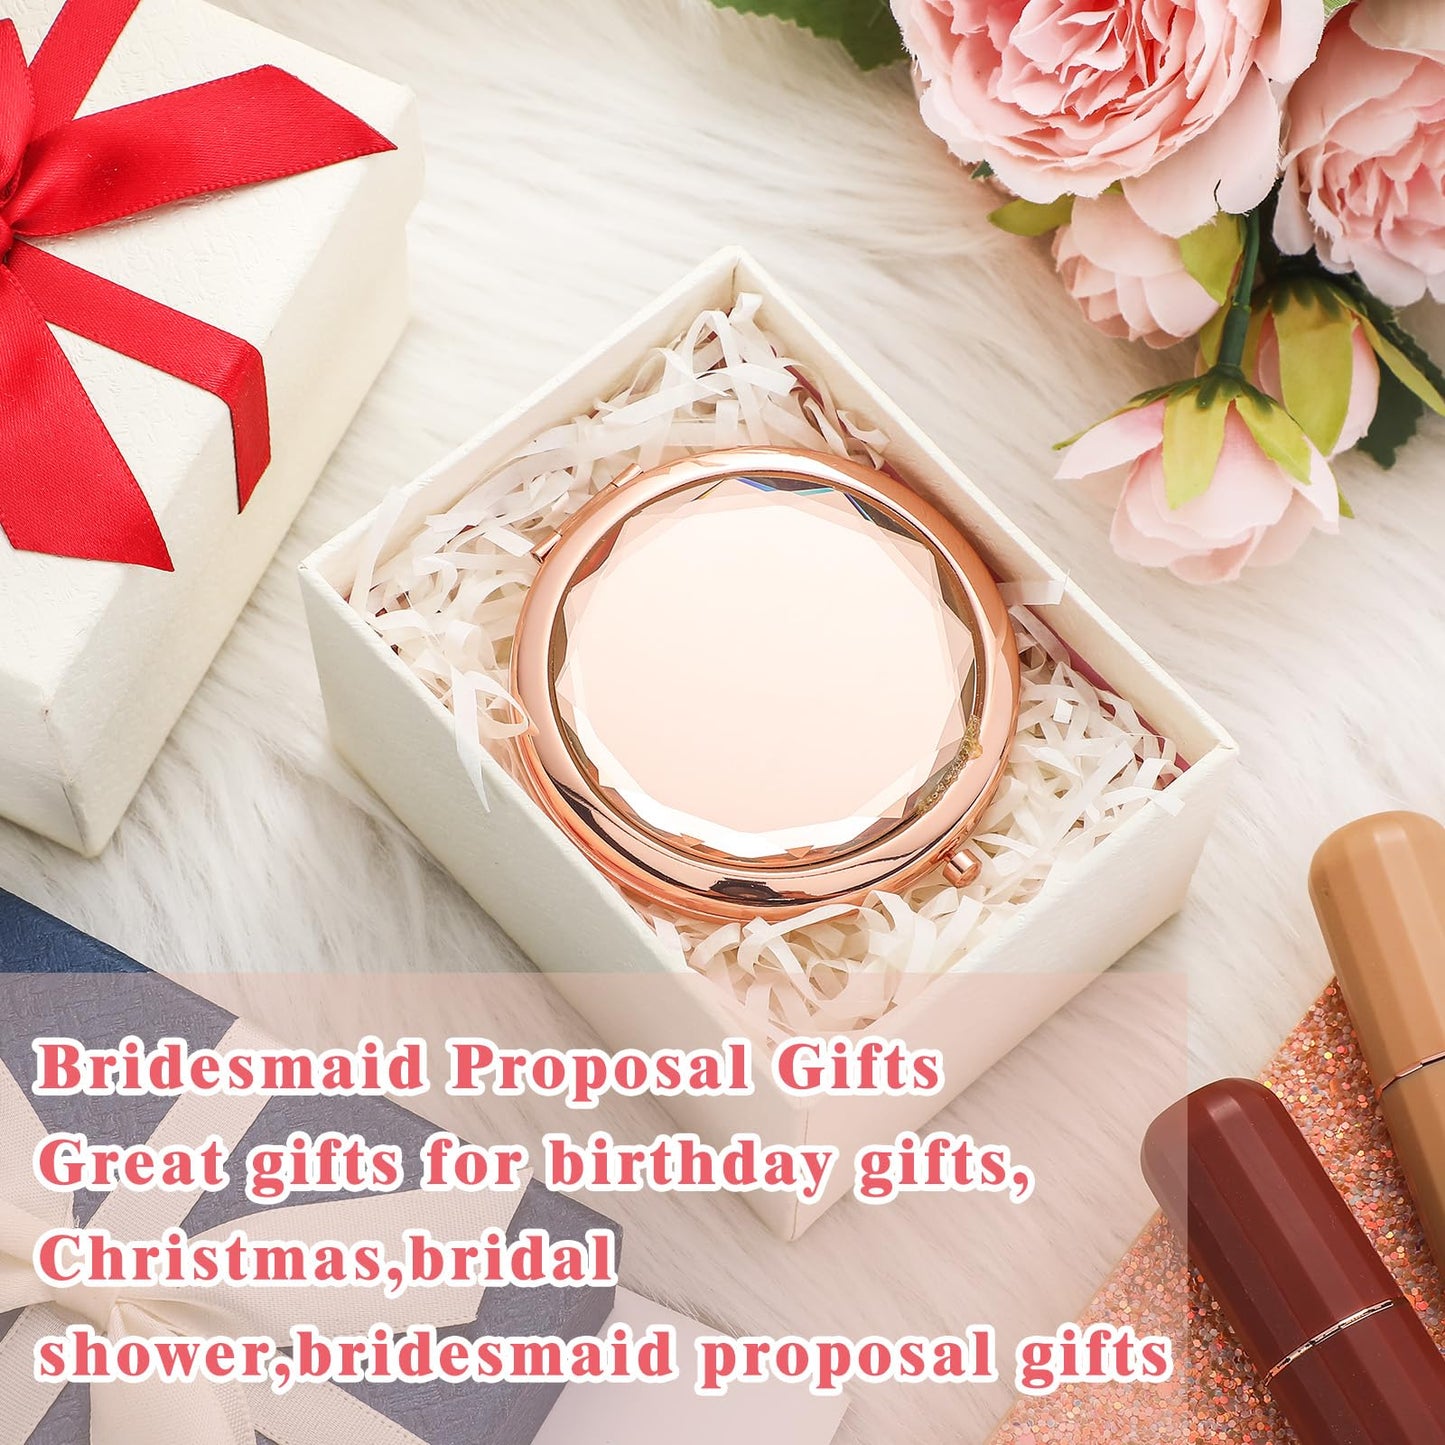 Barydat 24 Set Rose Gold Compact Mirrors Bulk Crystal Compact Makeup Mirrors Double Sided Pocket Mirrors for Women Bridesmaids Wedding Mirrors Gift for Bridal Shower Party Favors Christmas Party Gifts